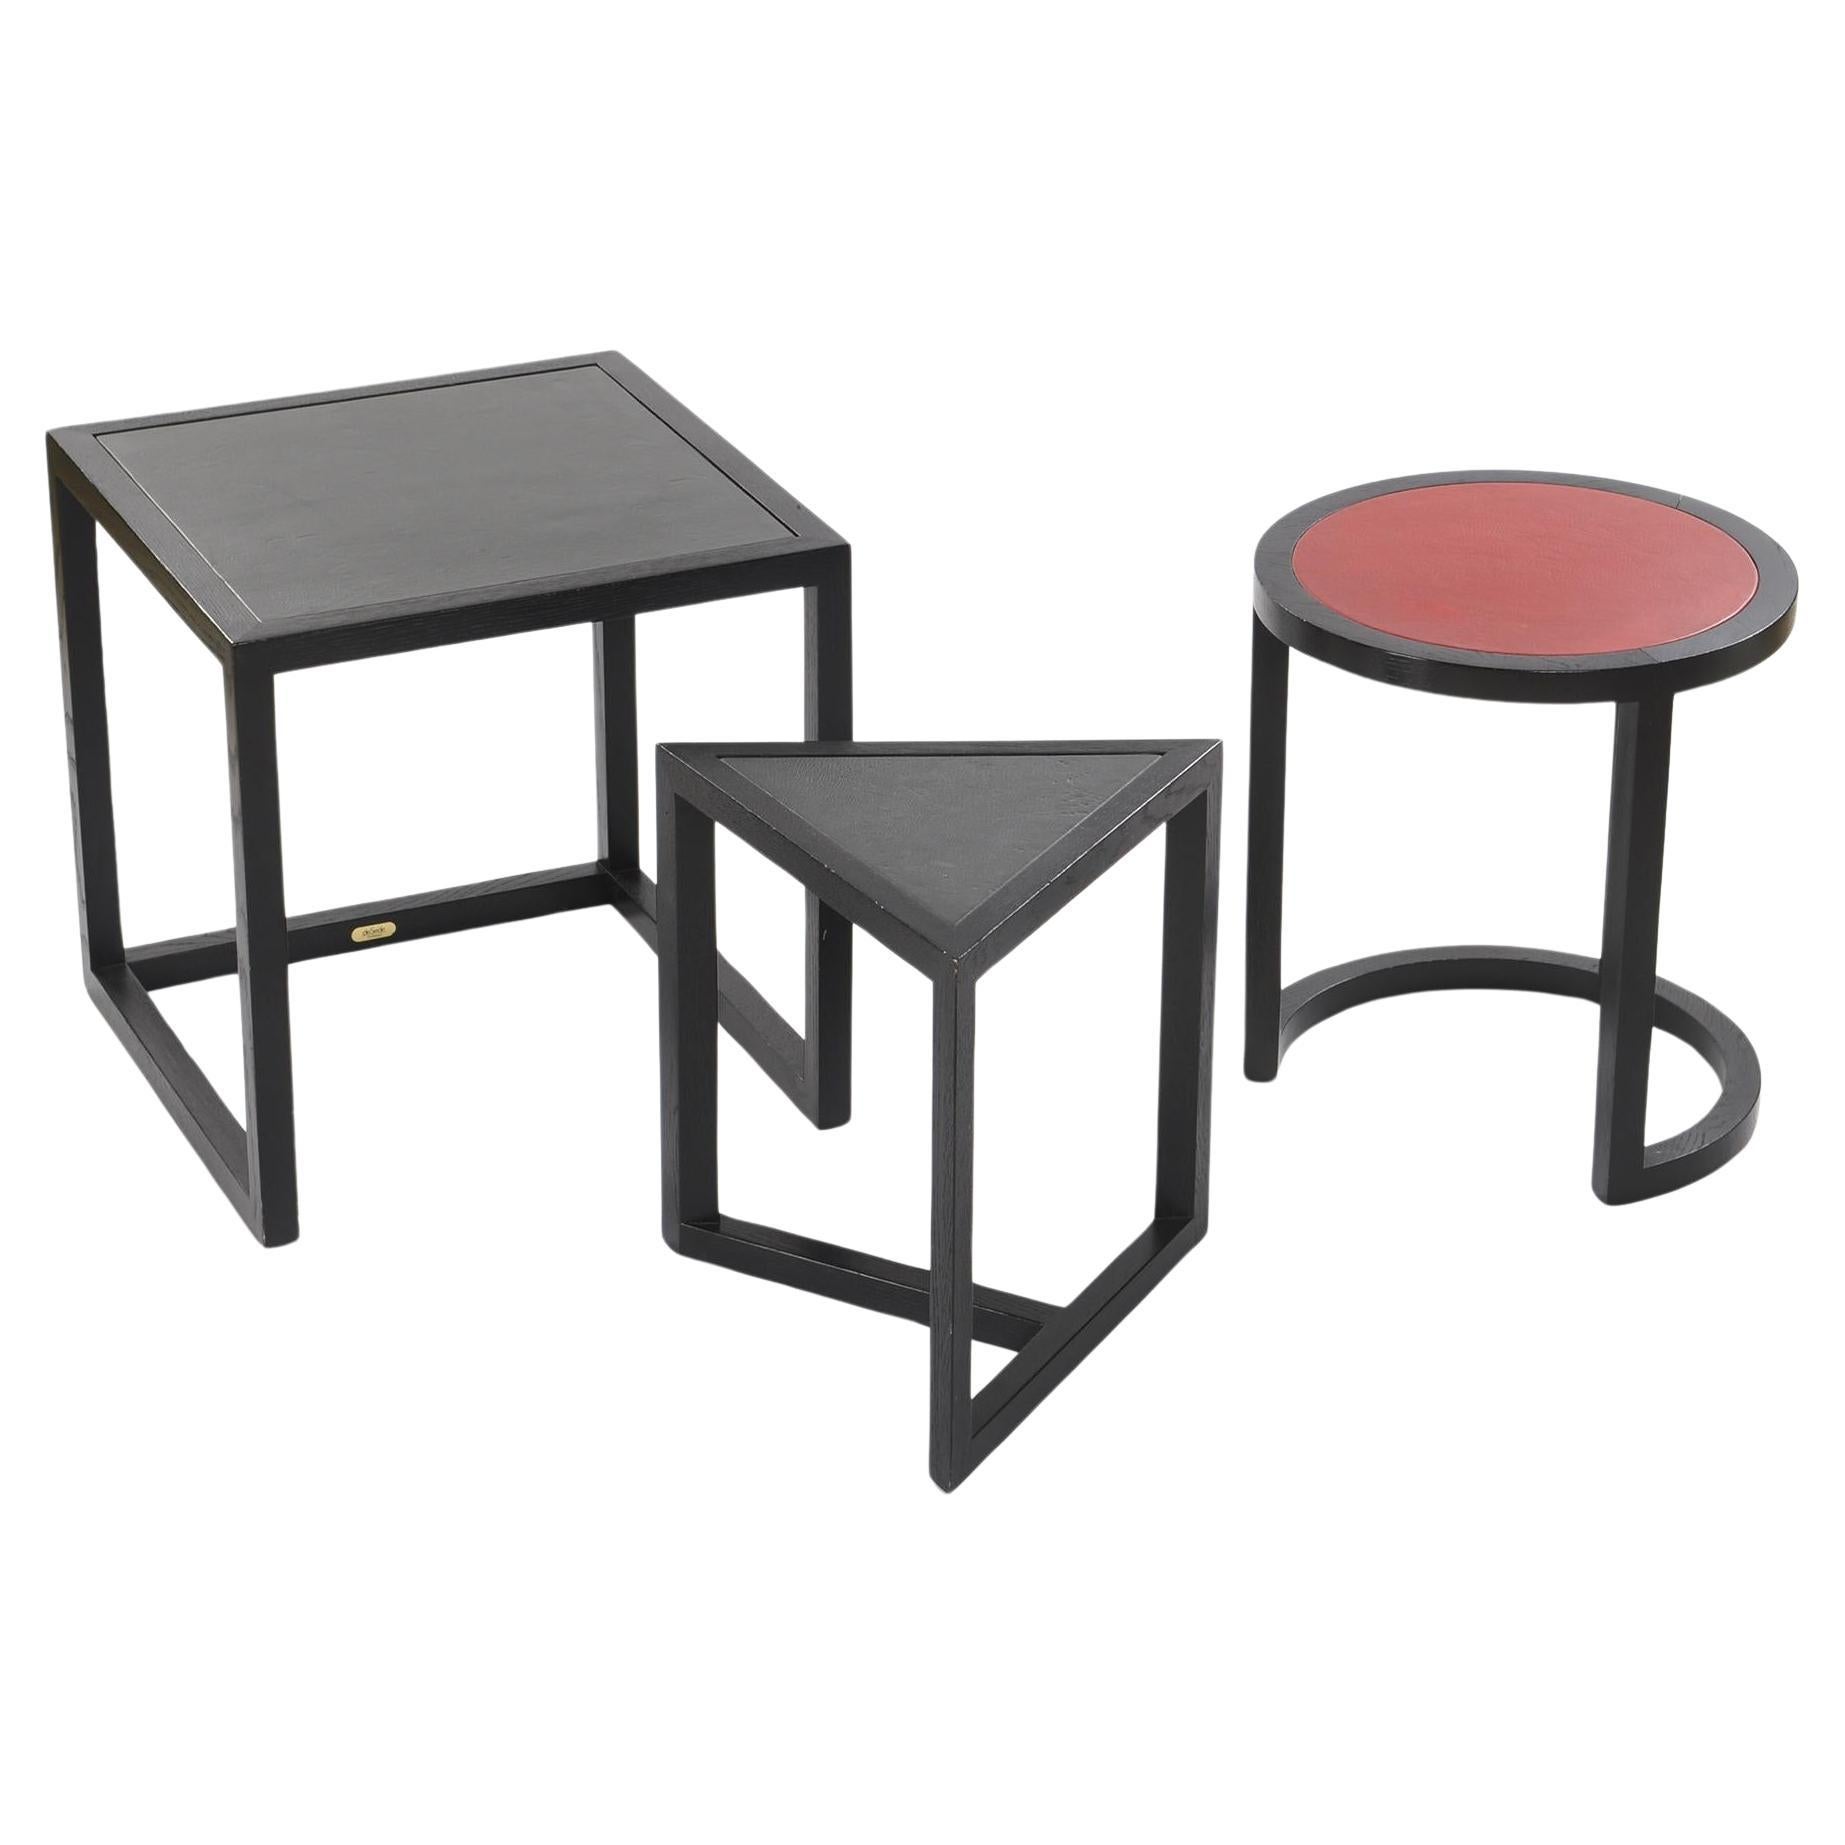 Limited Series Wood and Leather Nesting Tables by Stefan Zwicky for De Sede For Sale